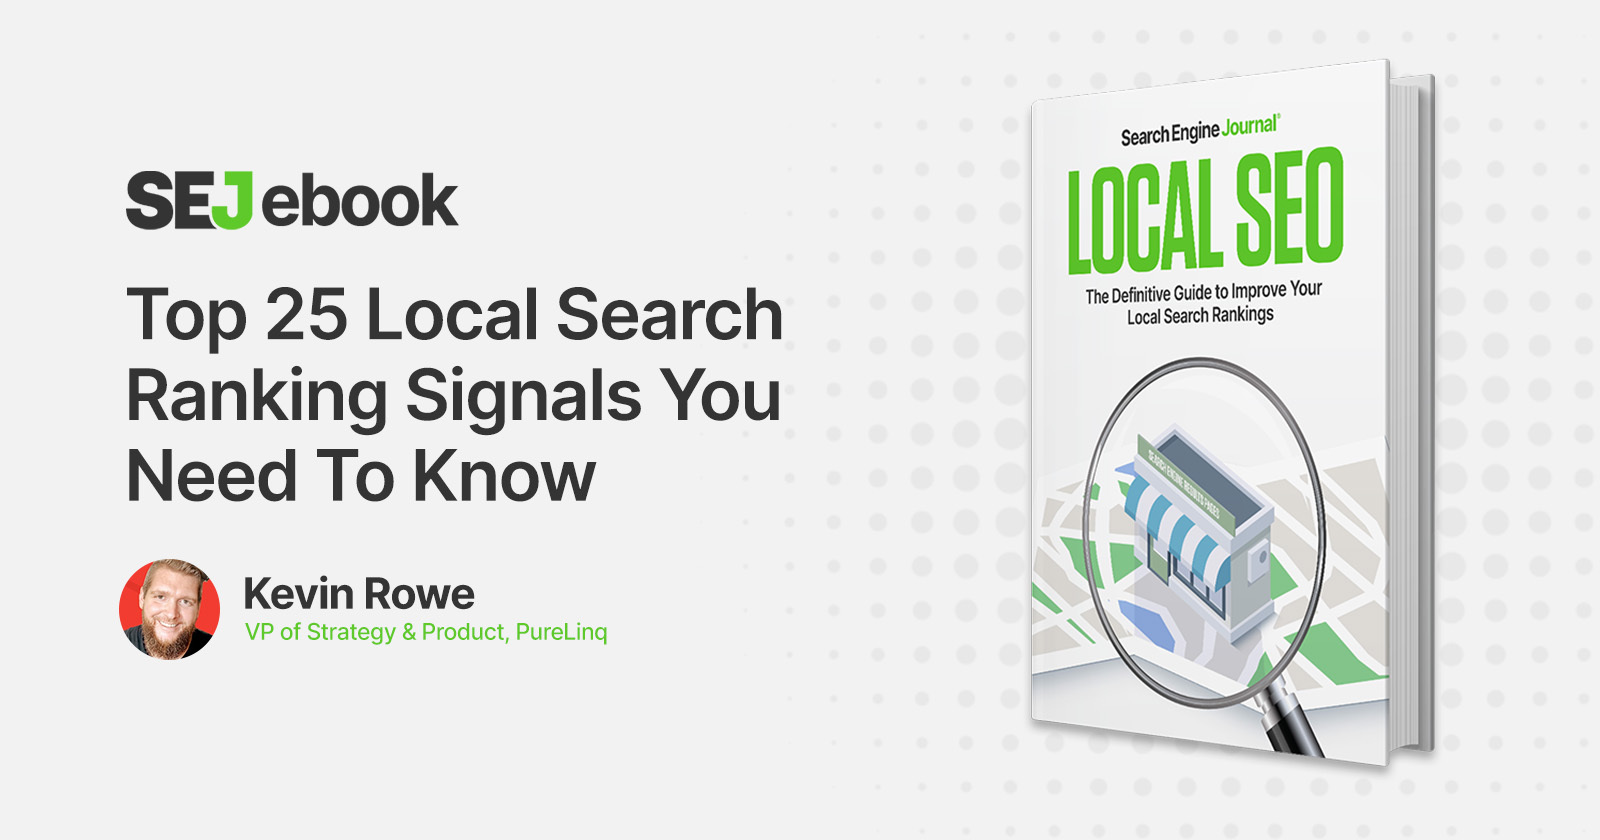 Top 25 Local Search Ranking Signals You Need To Know via @sejournal, @_kevinrowe